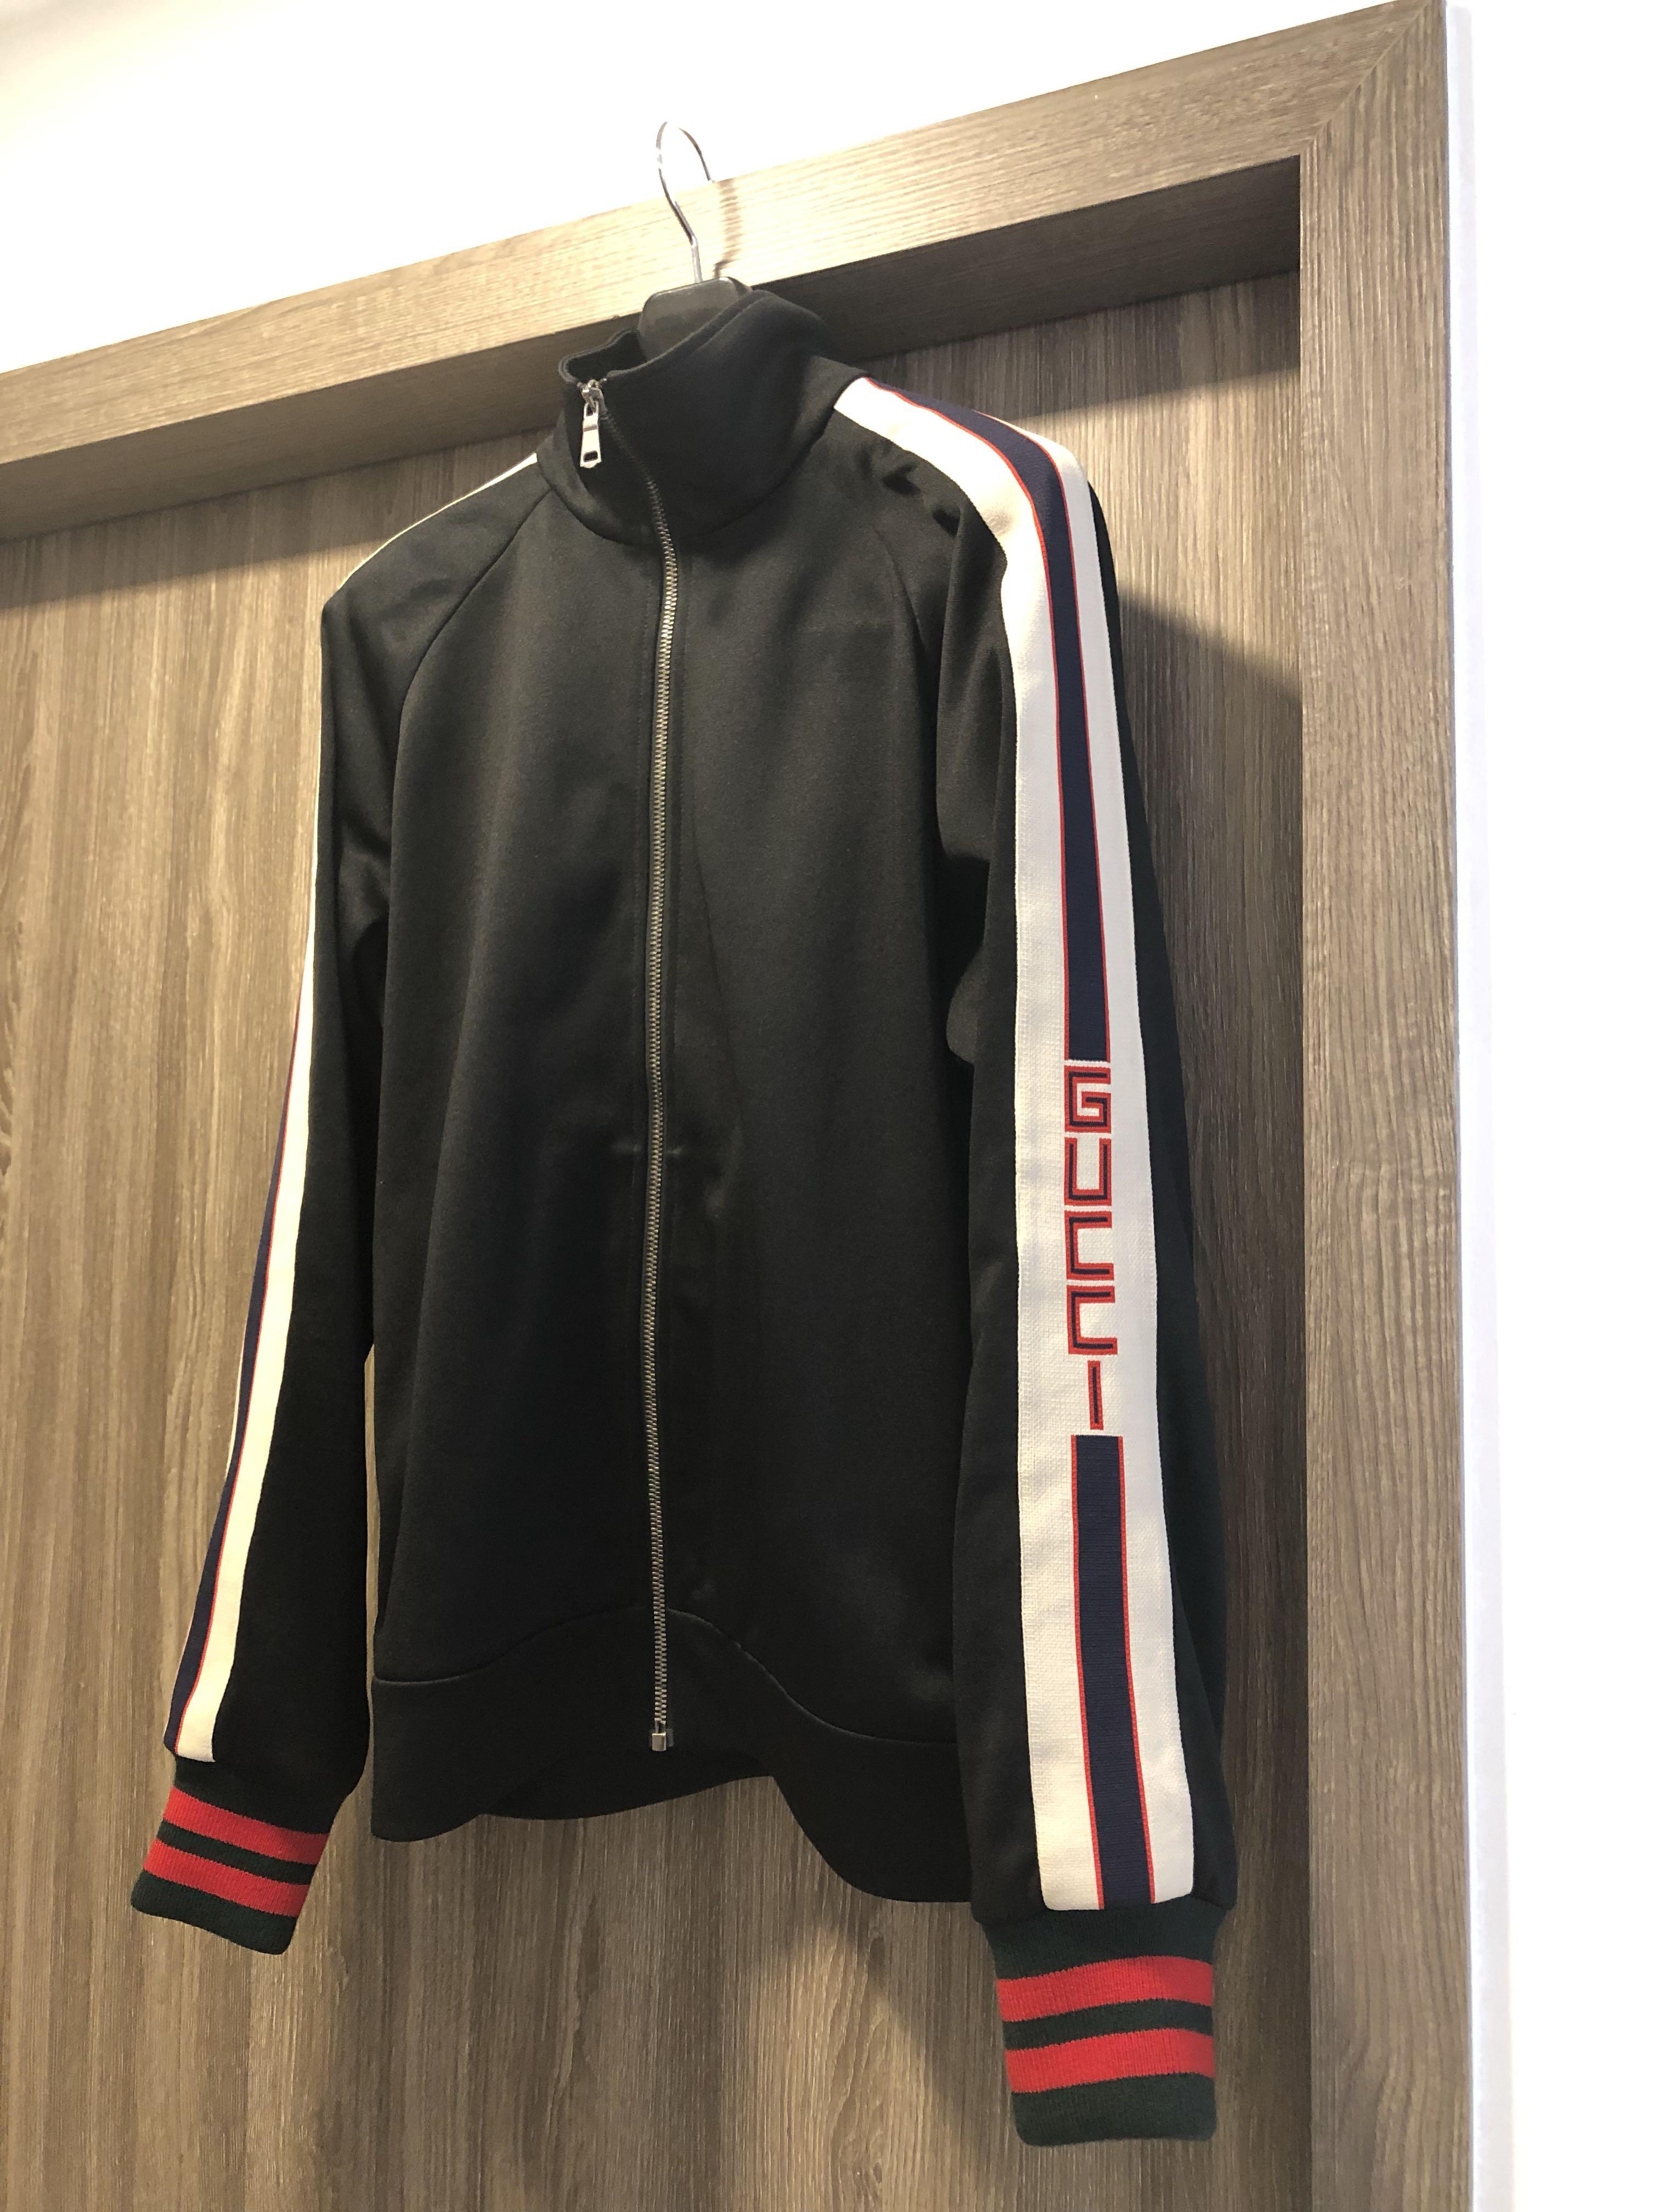 jersey and jacket